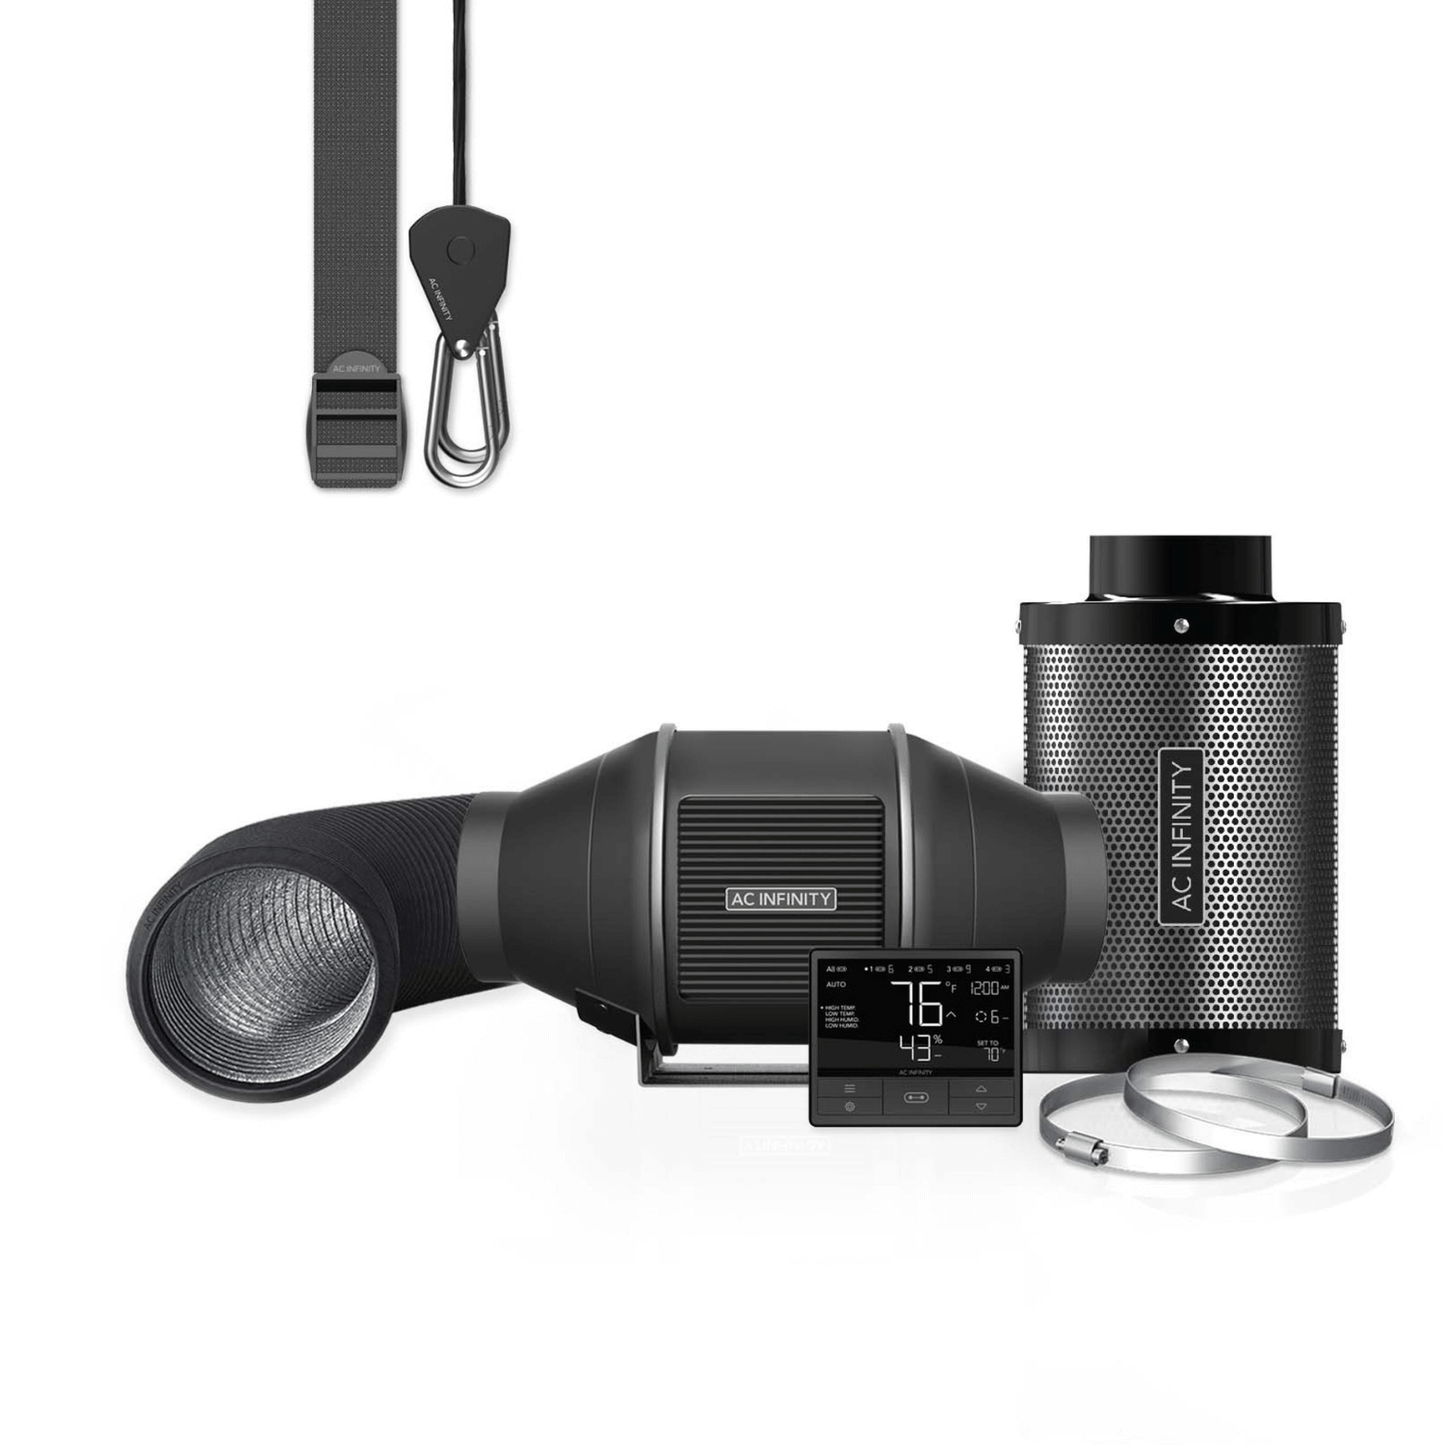 AC Infinity Air Filtration Kit PRO 4", Inline Fan with Smart Controller, Carbon Filter & Ducting Combo AC-FKT4 Ventilation 819137022911